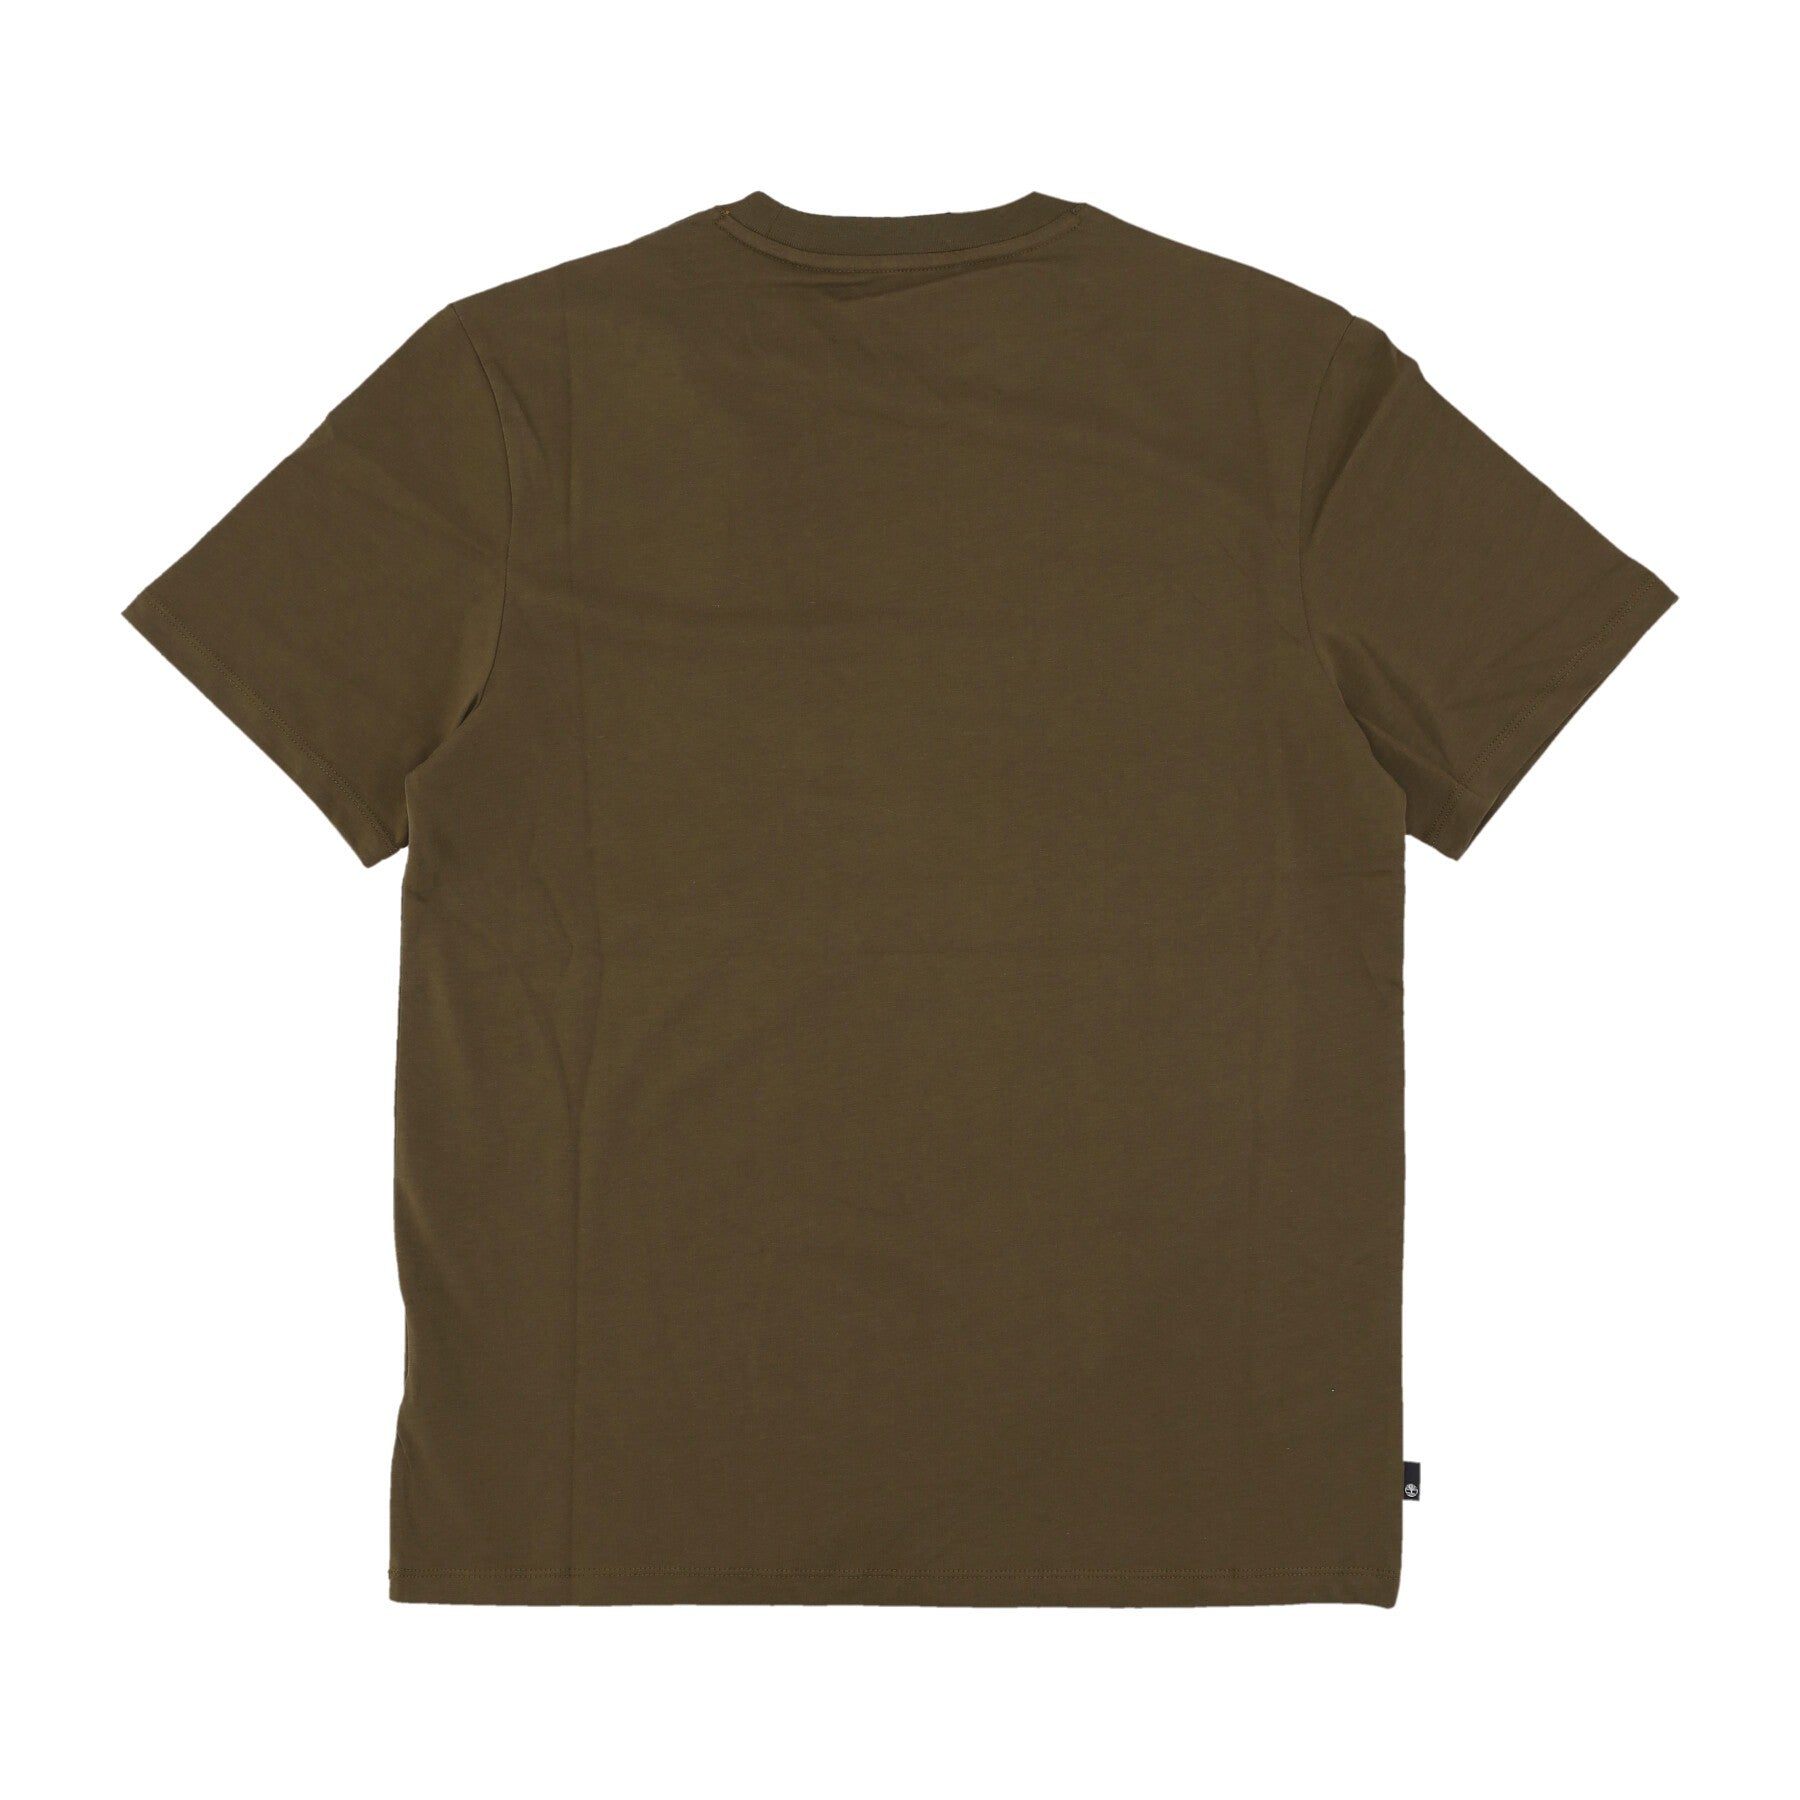 Timberland, Maglietta Uomo Wwes Front Tee, 